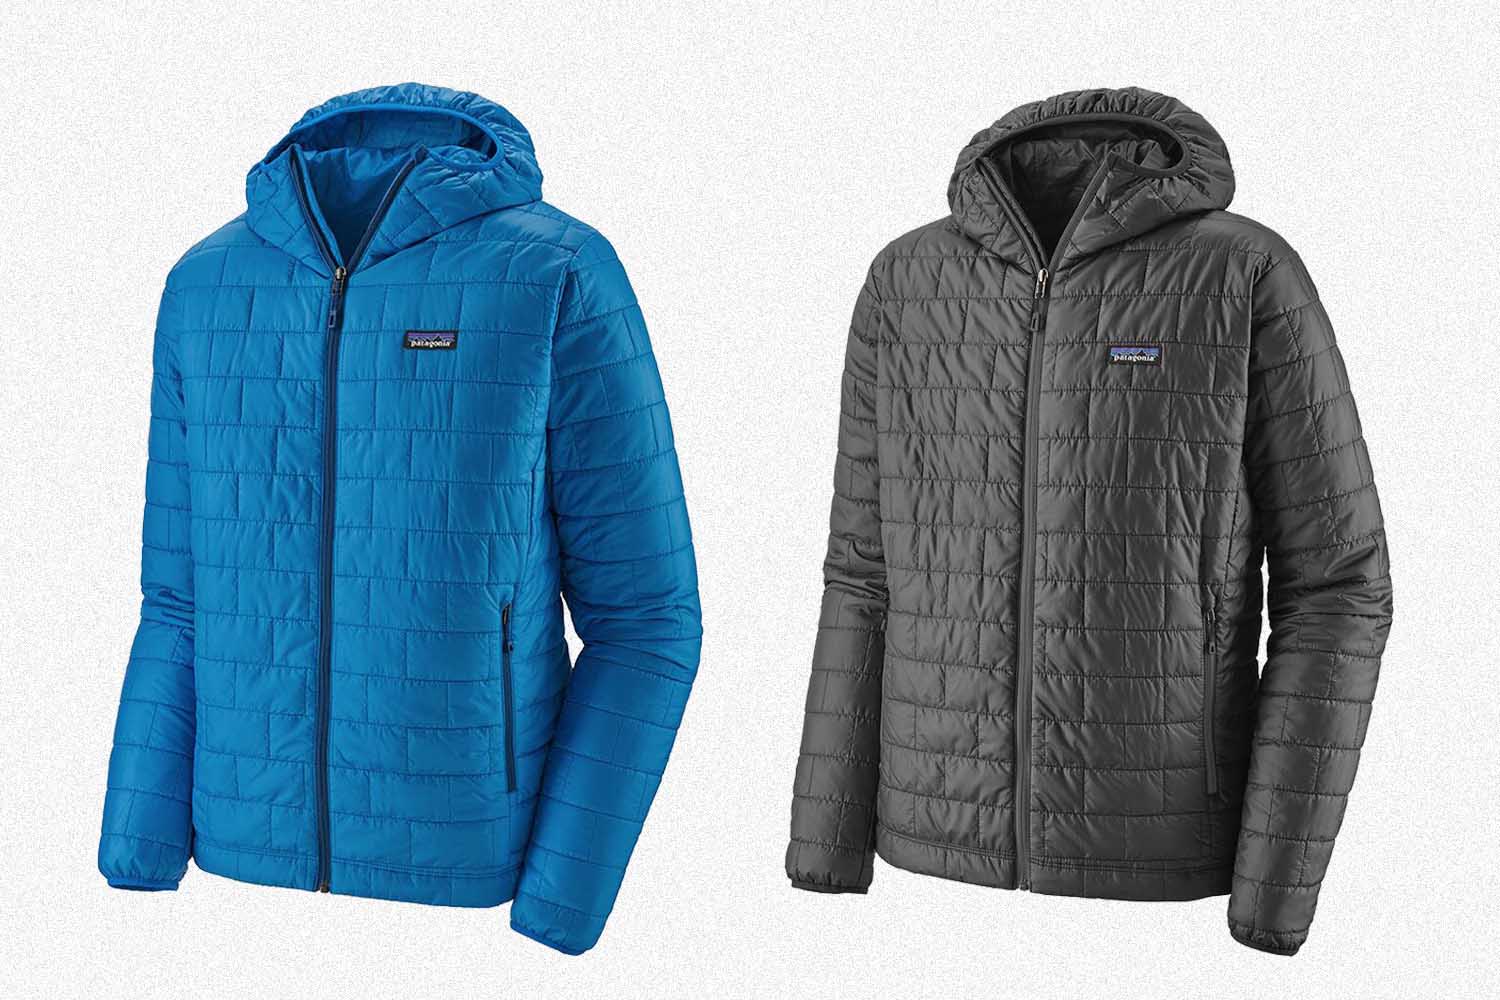 Deal: The Unbeatable Nano Puff Jacket Is $100 Off